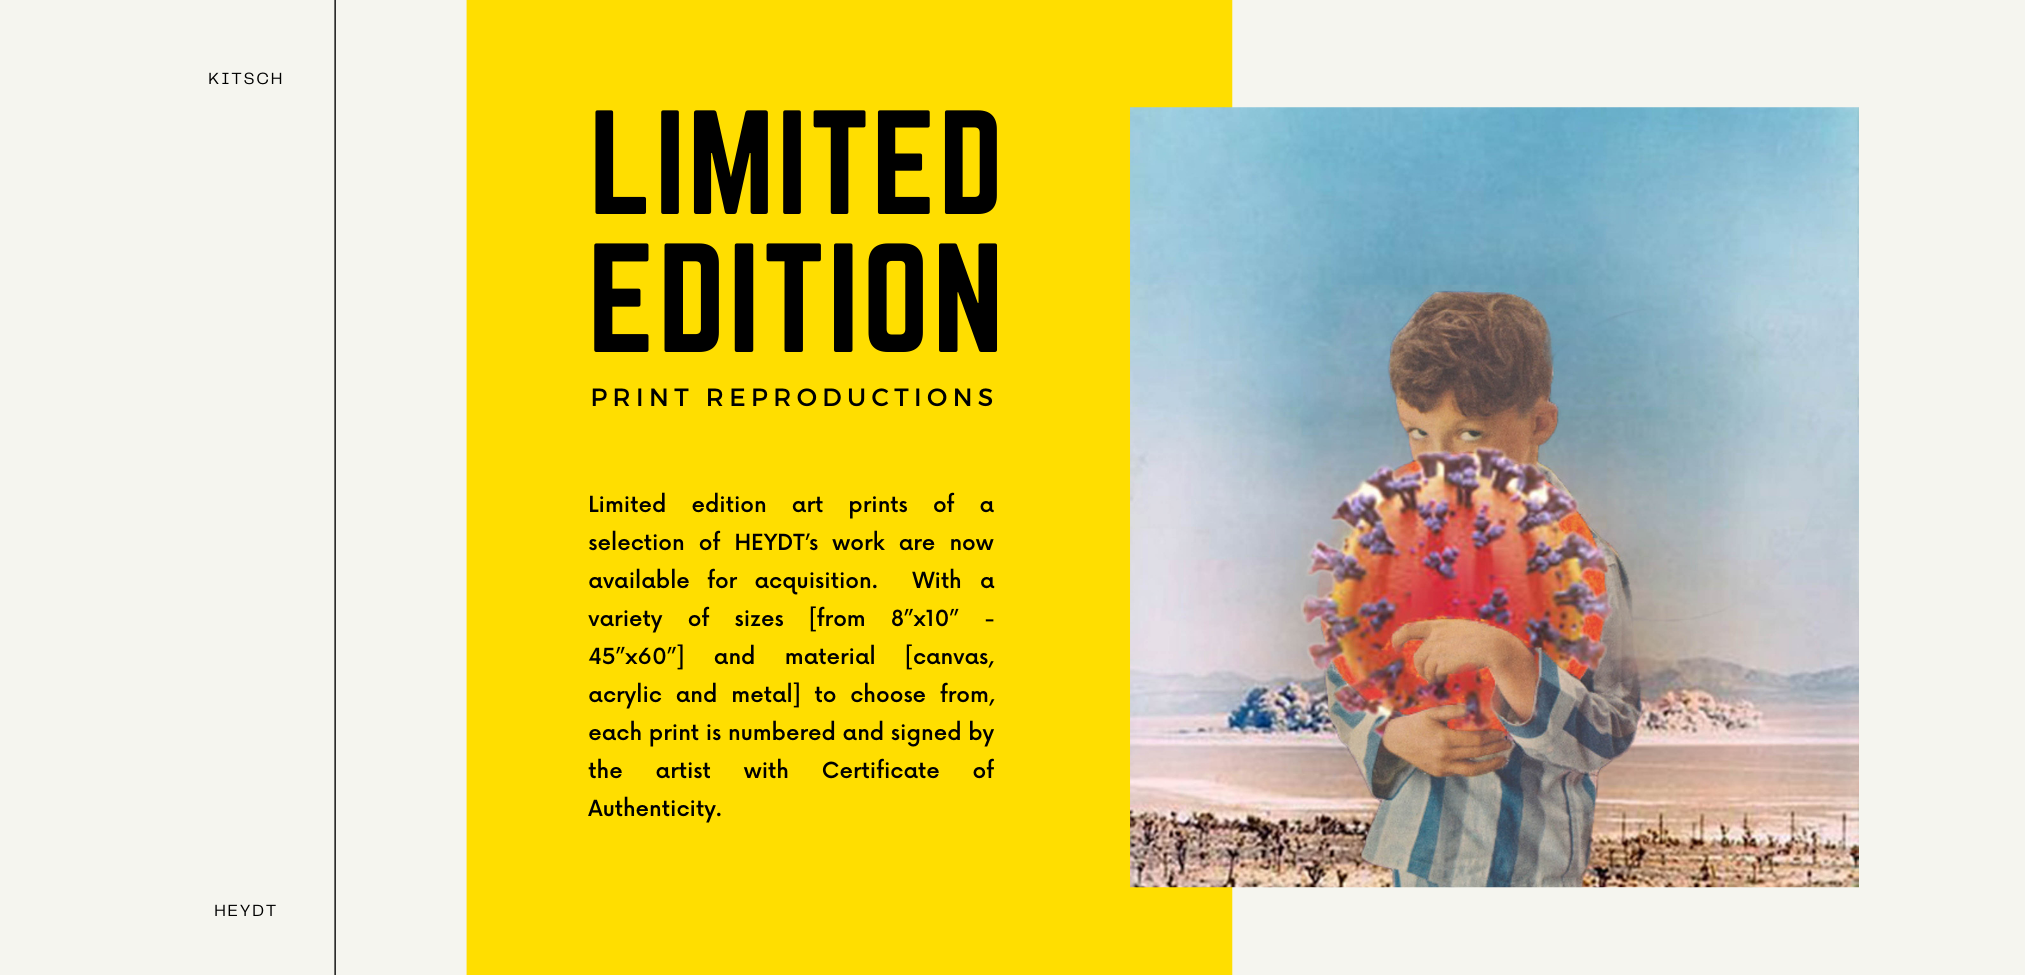 limited edition prints-KITSCH-HEYDT41.png